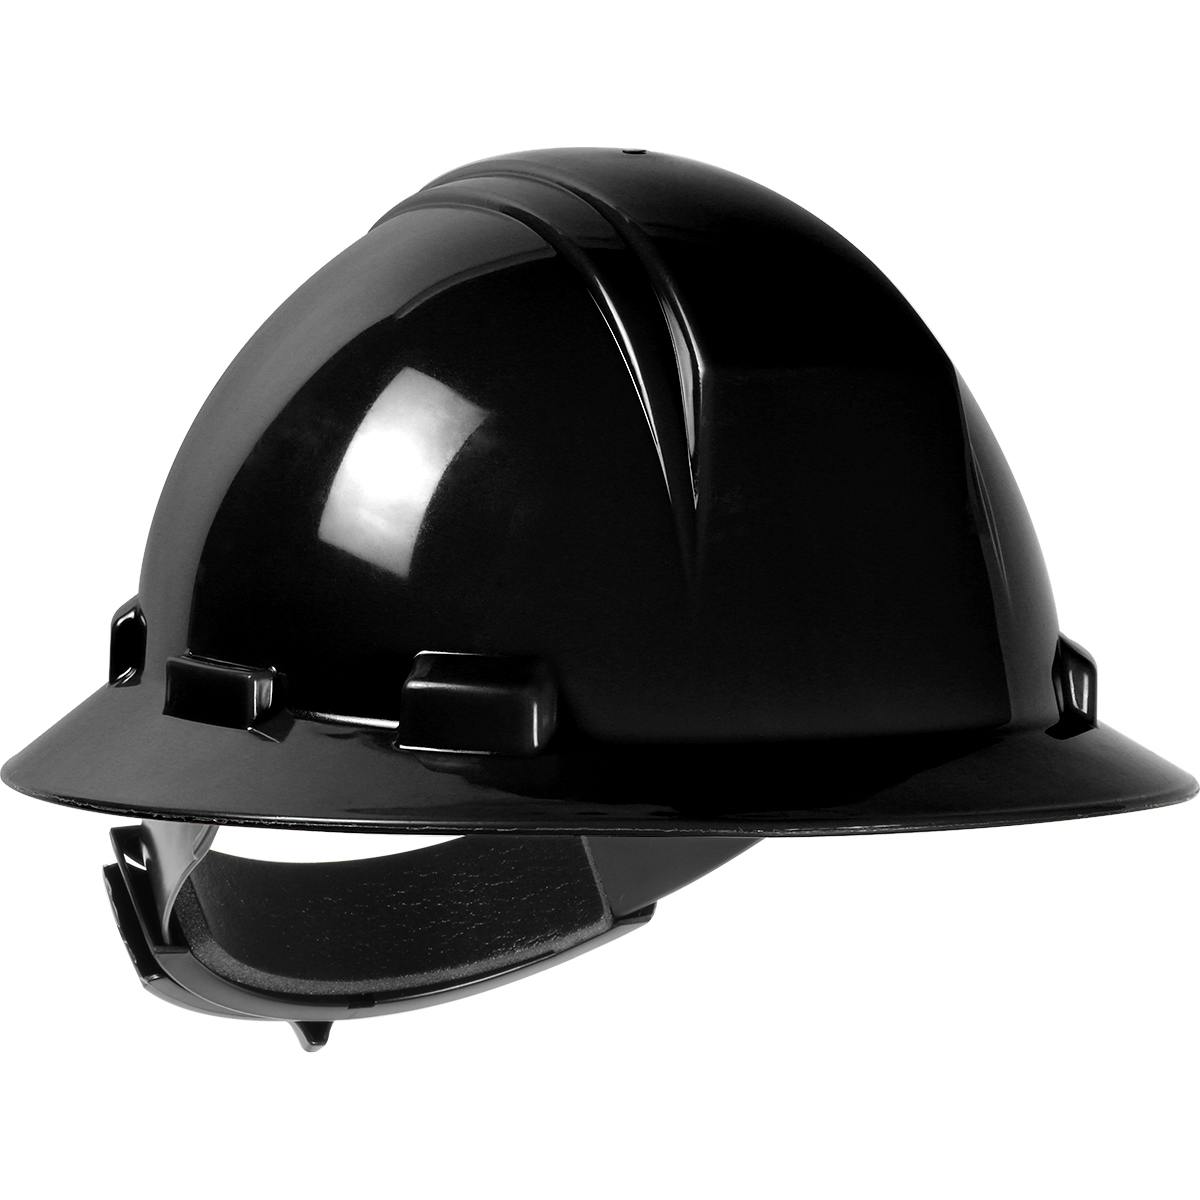 Kilimanjaro™ Type II Full Brim Hard Hat with HDPE Shell, 4-Point Textile Suspension and Wheel Ratchet Adjustment (280-HP642R)